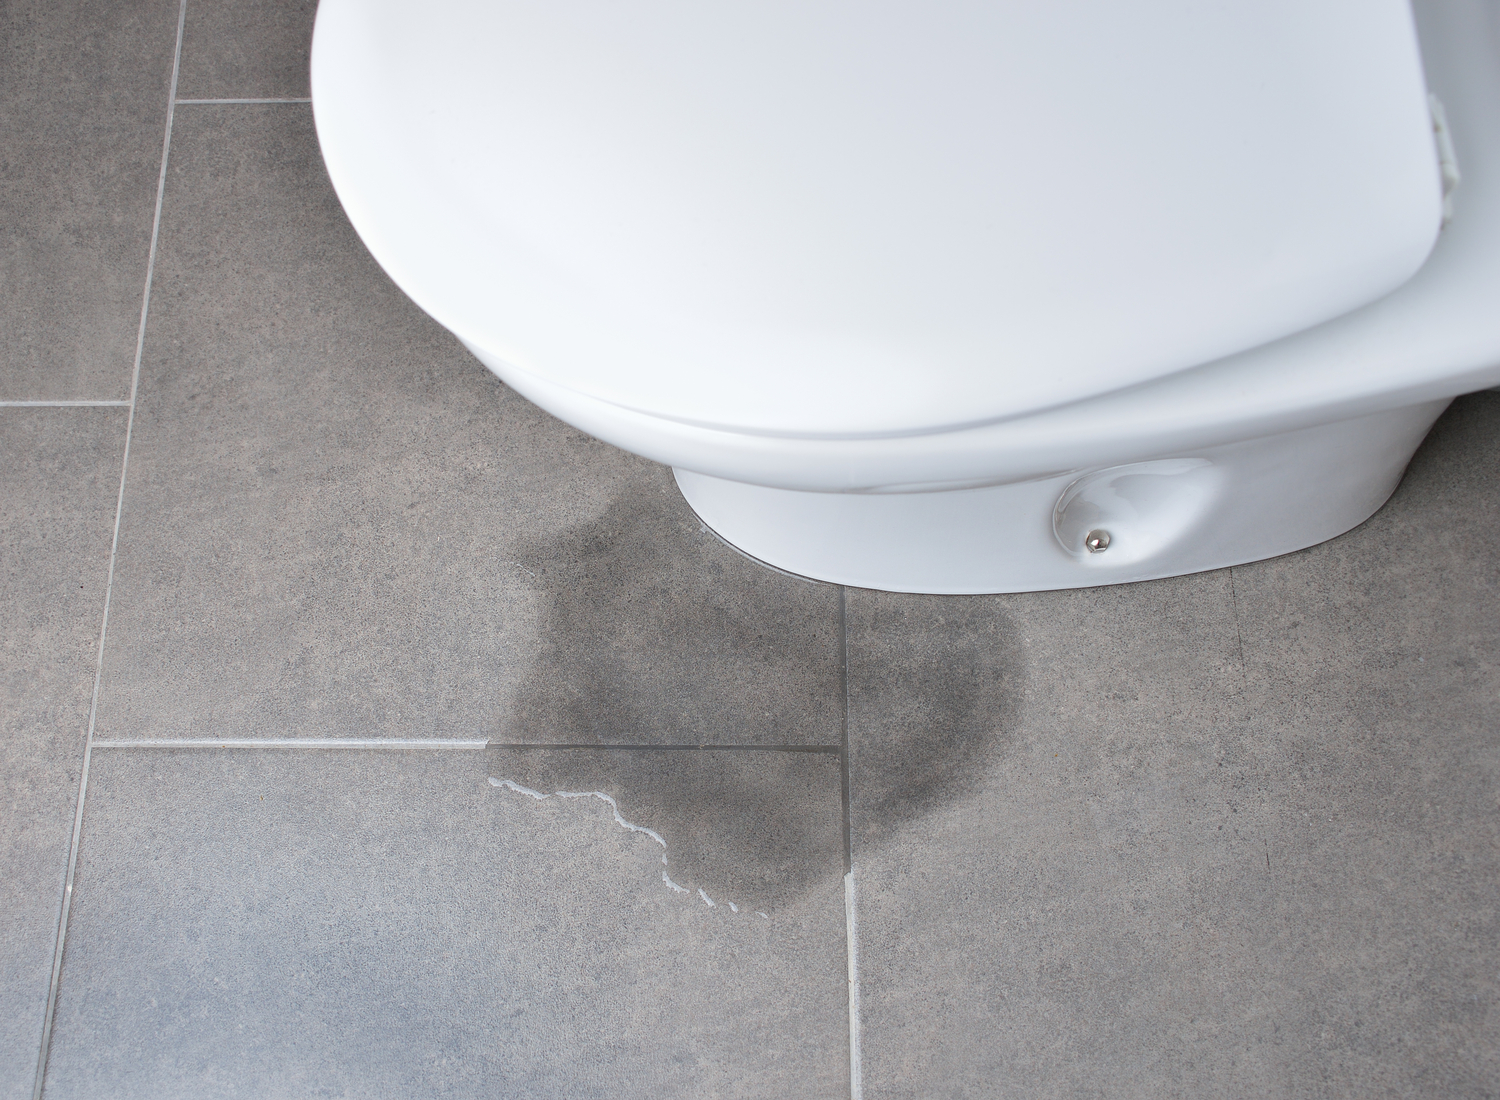 6 Reasons Why Your Toilet Is Leaking at the Base